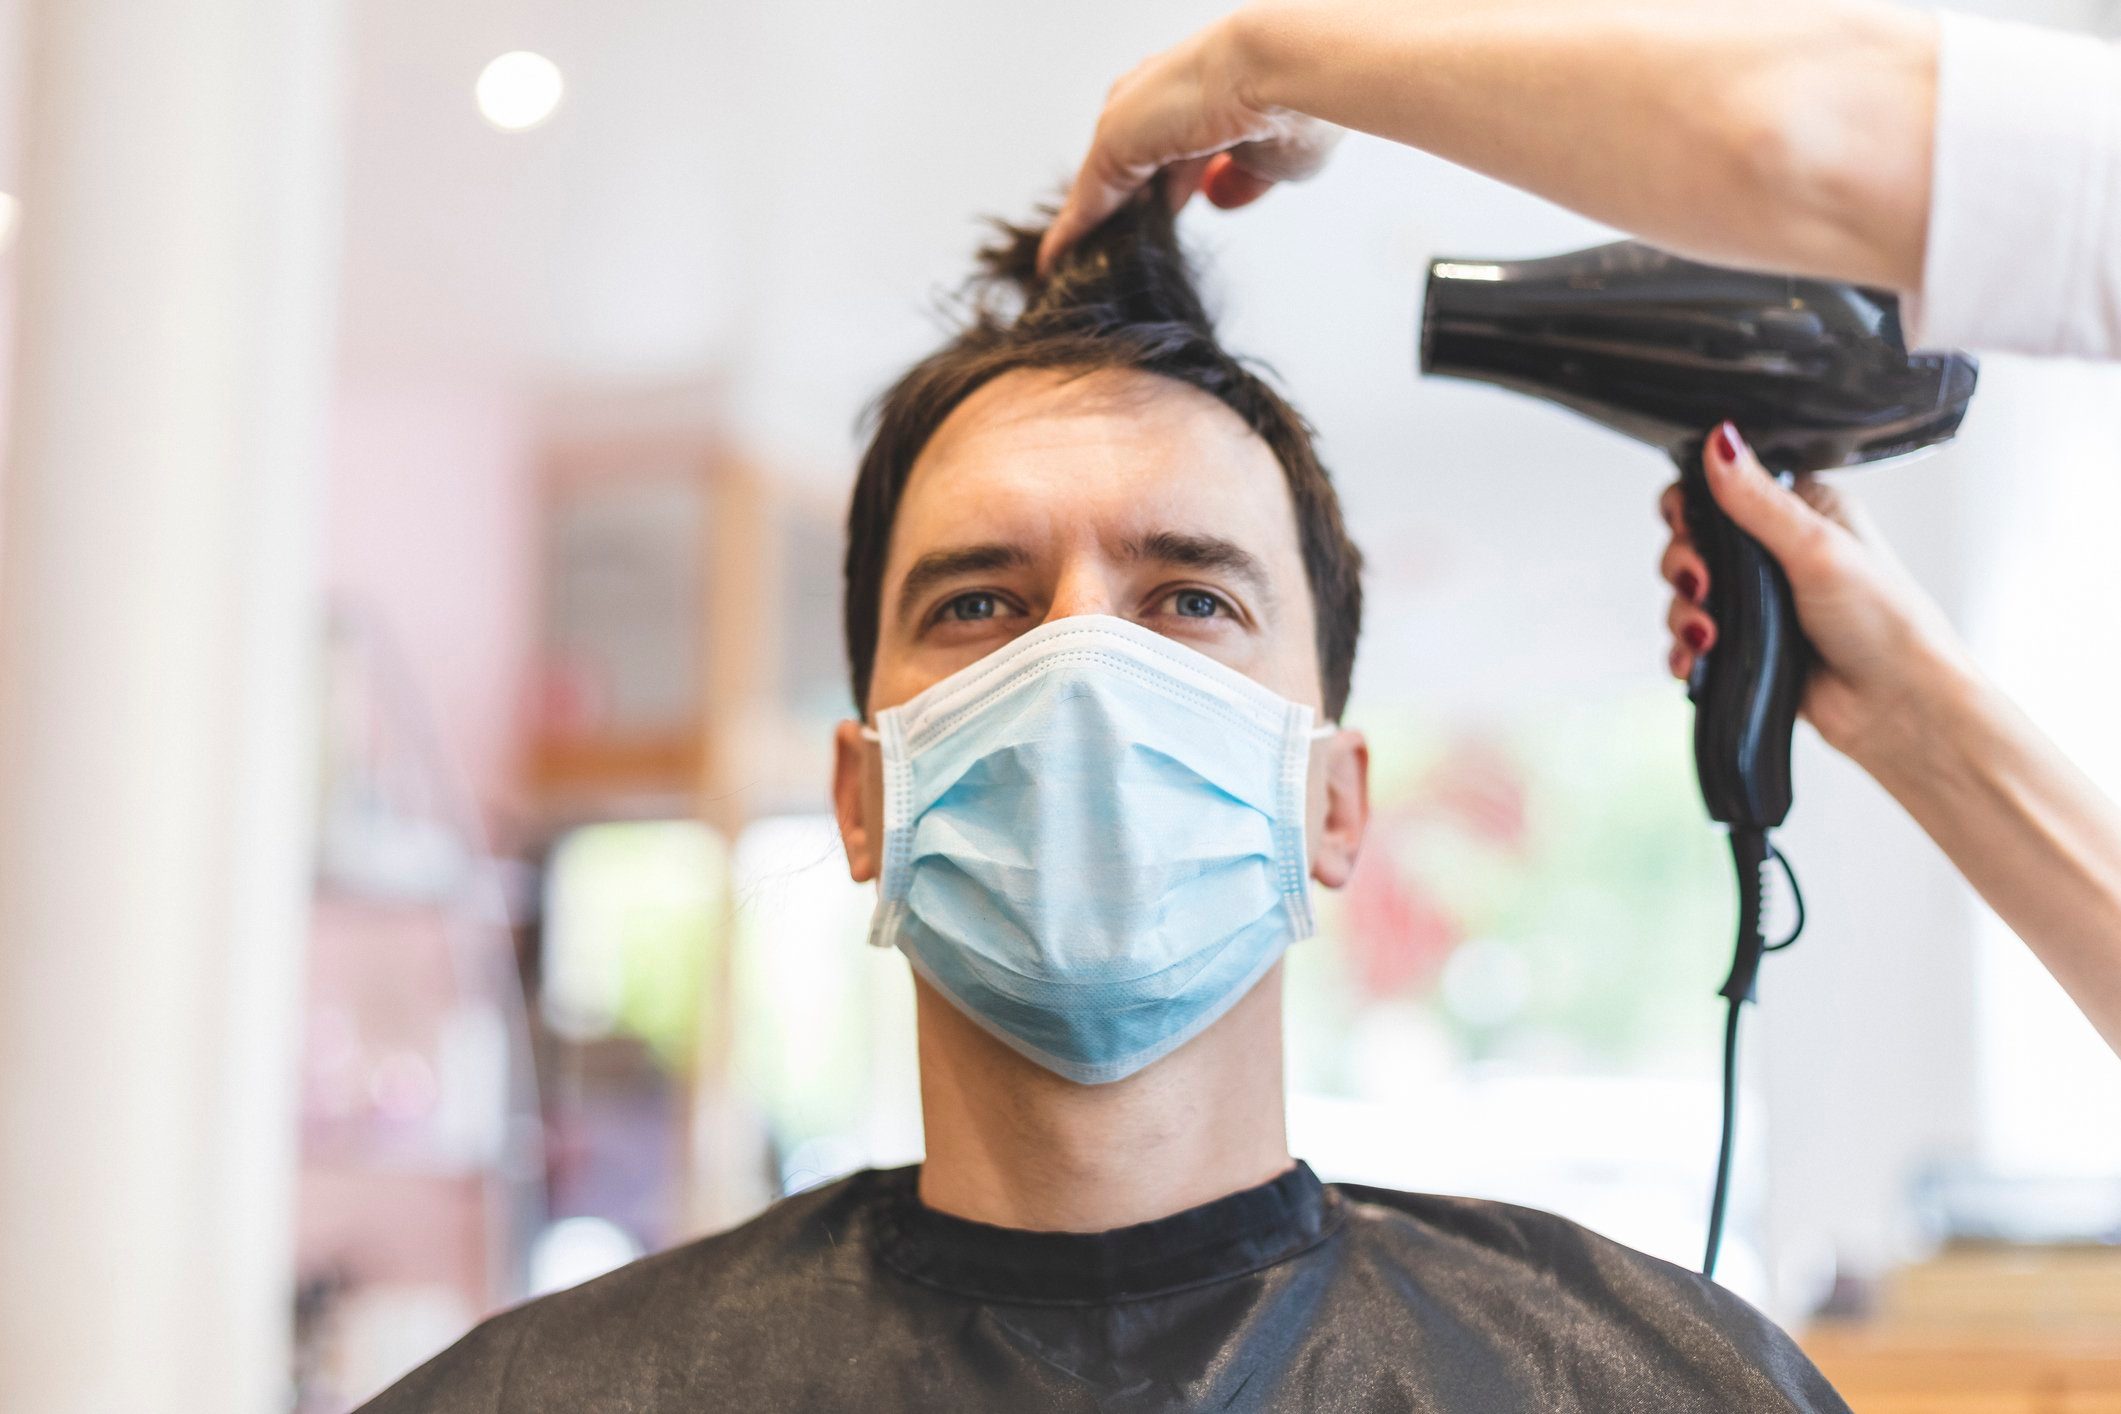 Hairdresser Drying Hair of Customer Wearing Protective Mask